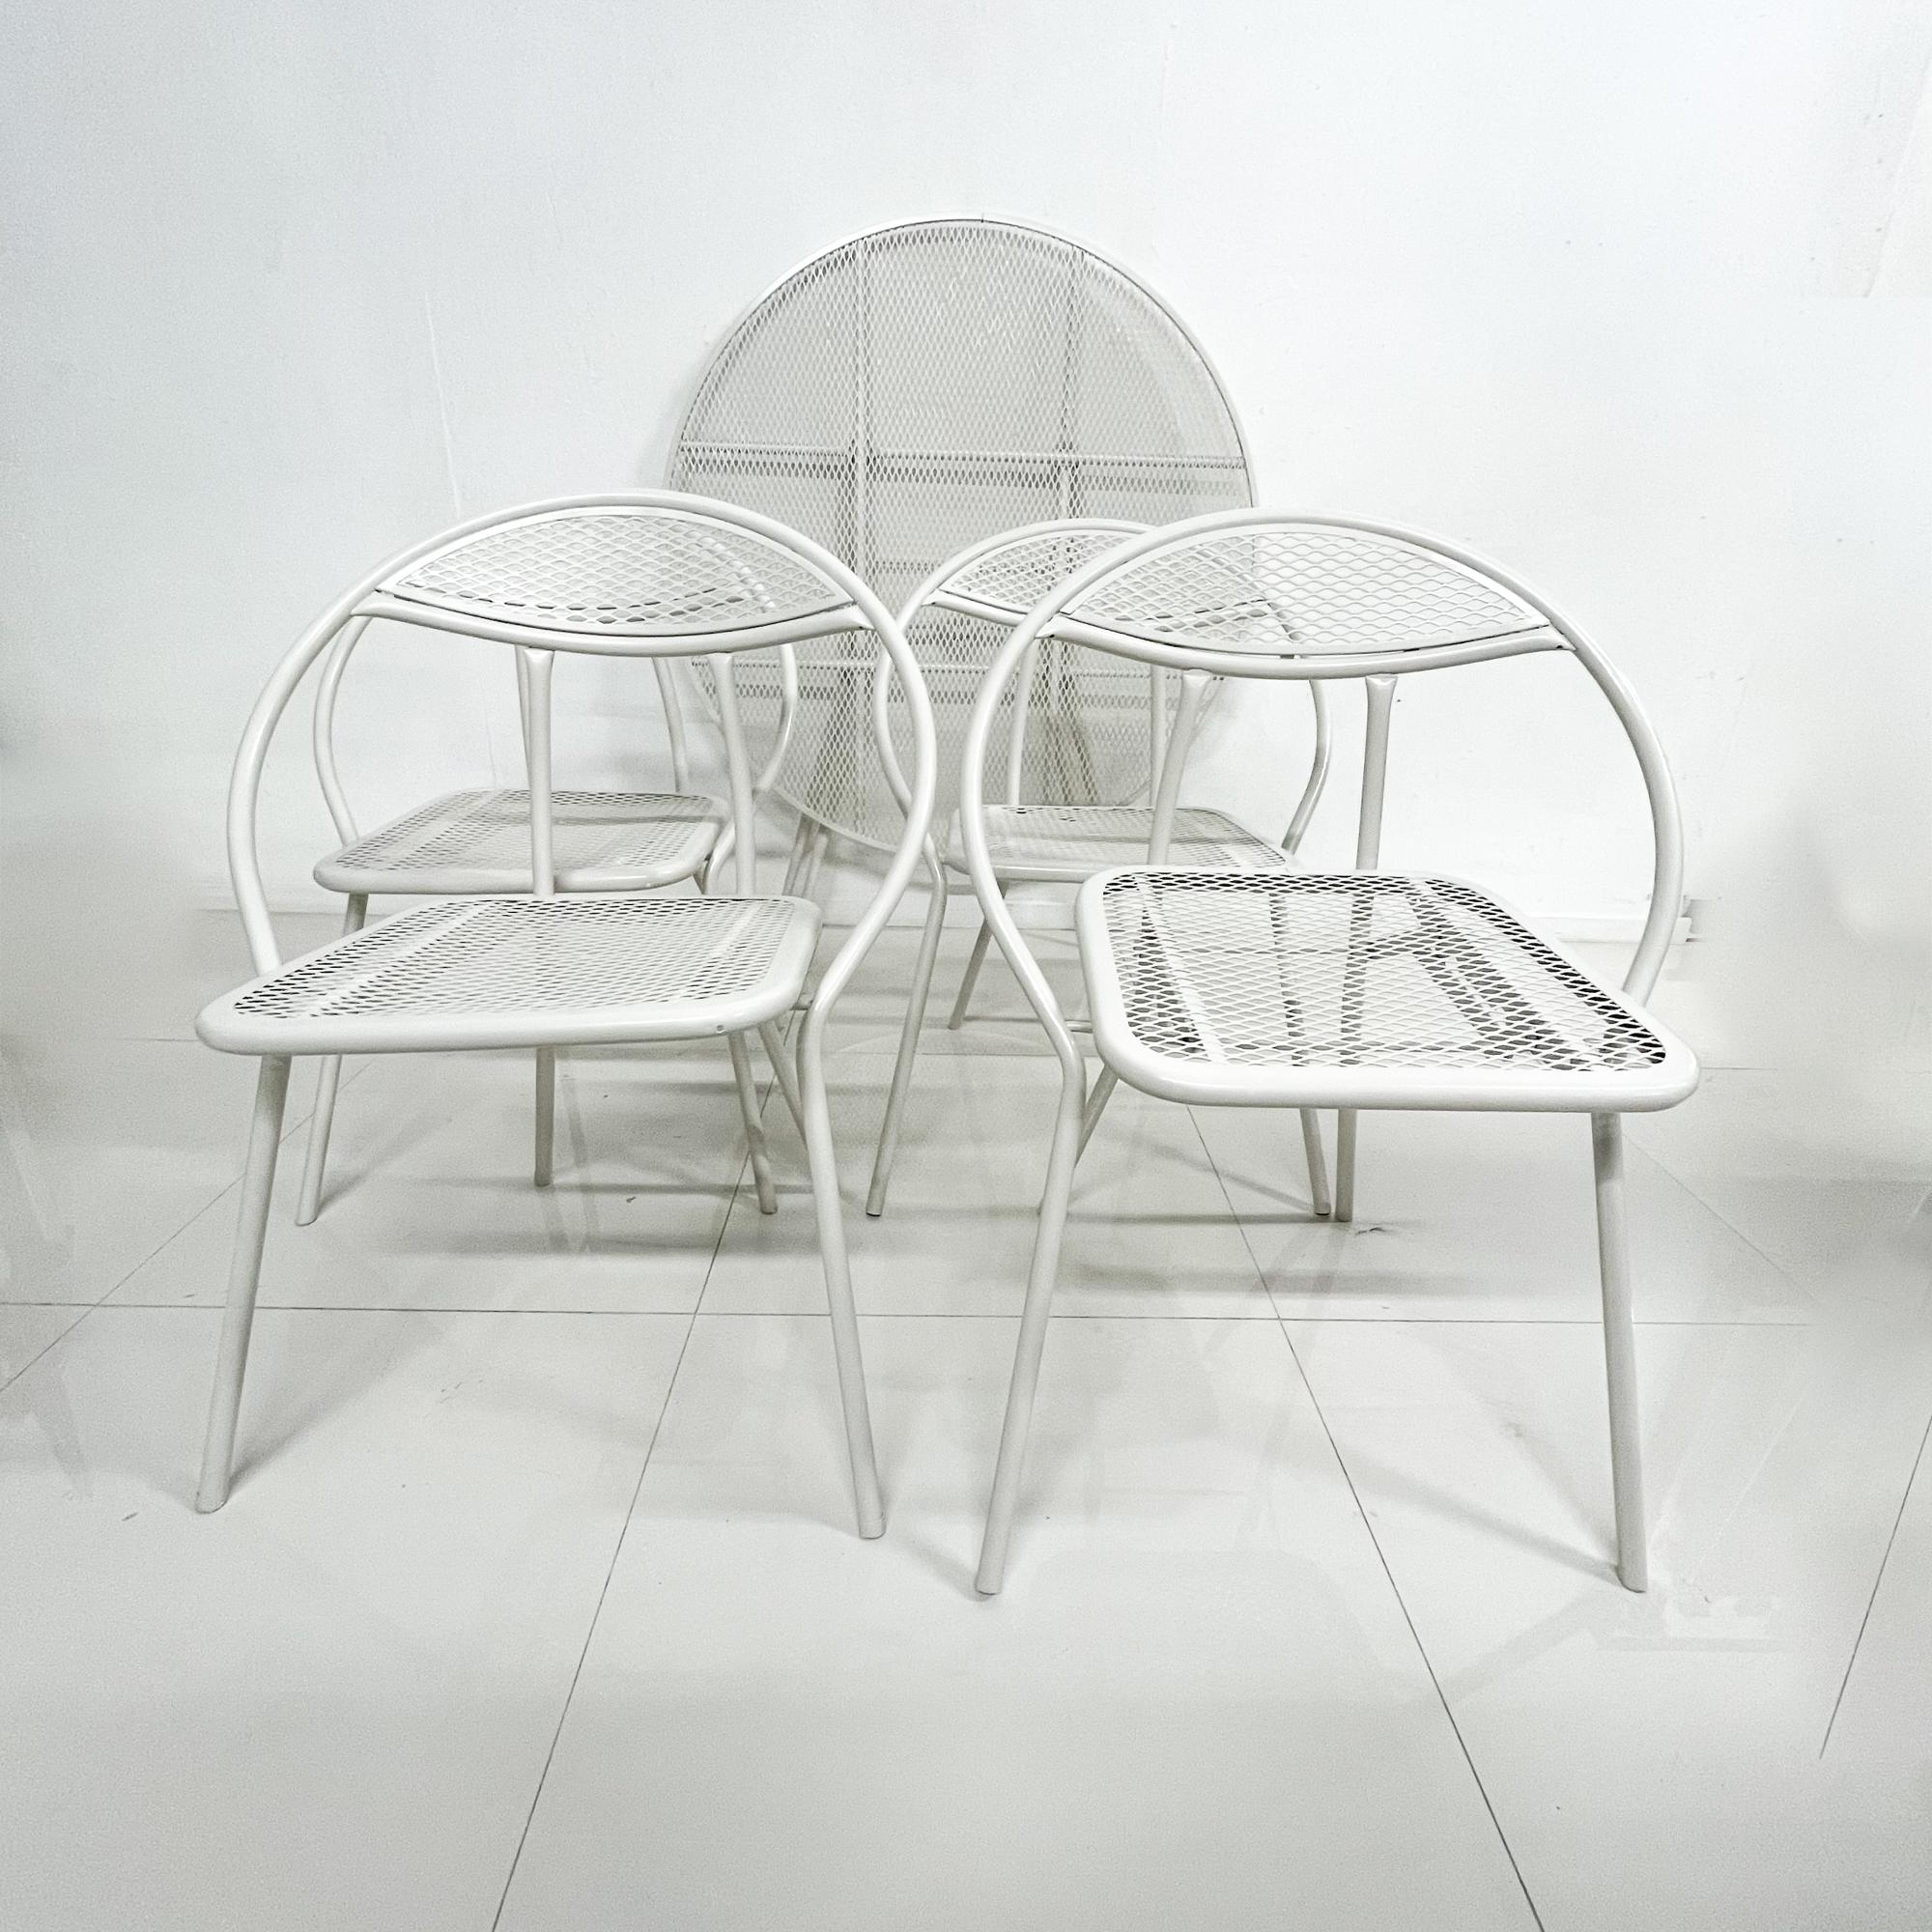 For your consideration a Mid-Century Modern dining set for the outdoors designed and produced by Salterini.

Restored with powder coated protective paint in off white color. 
Set includes four chairs and a round table. All the chairs and the